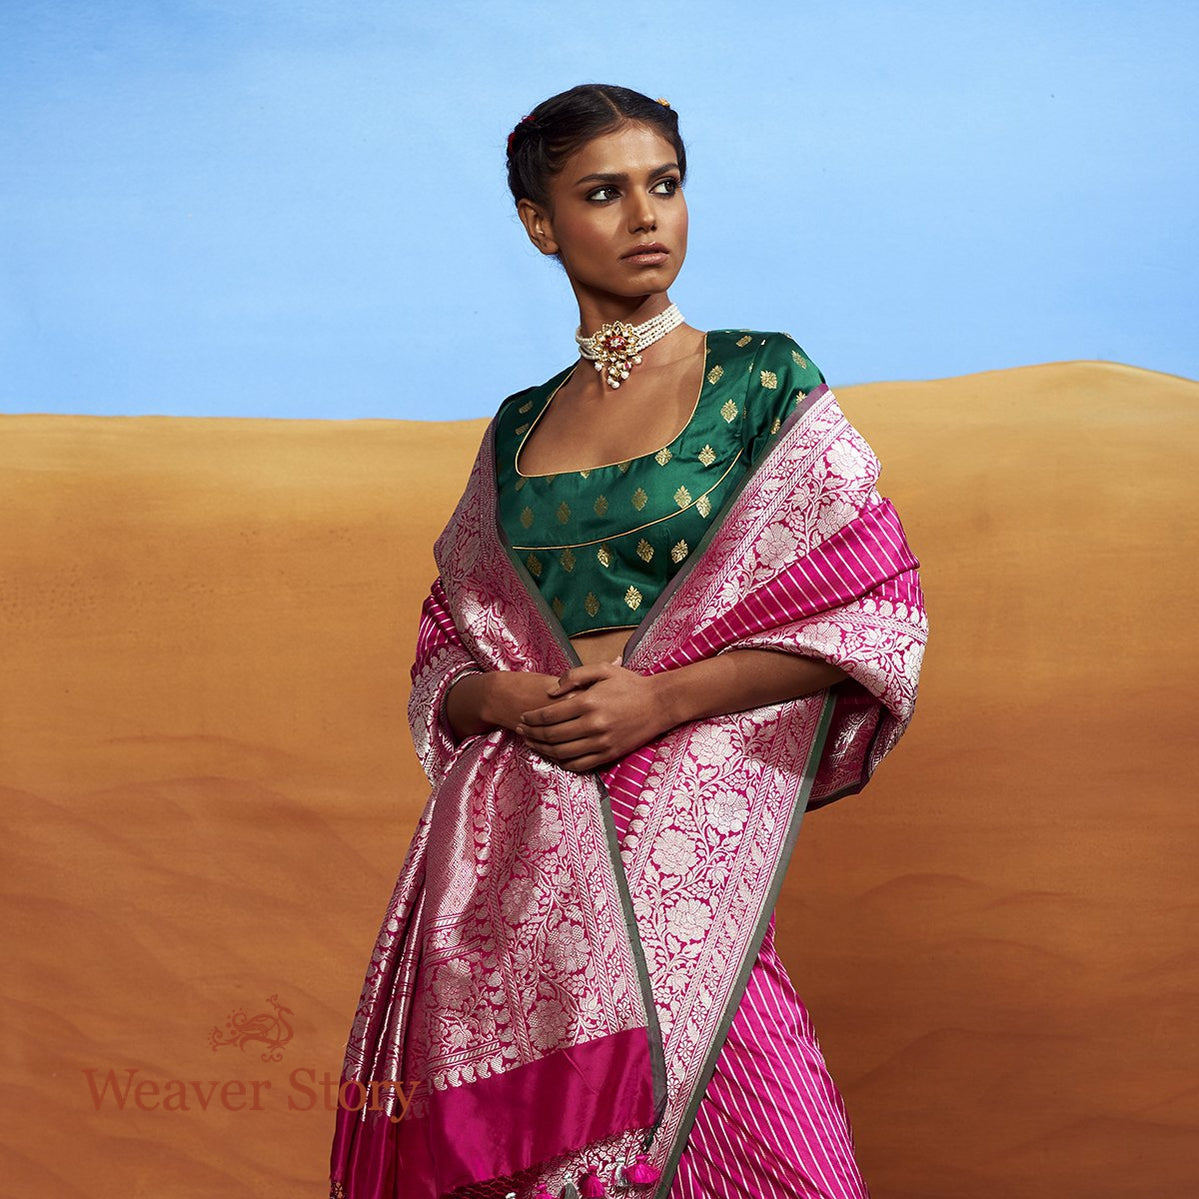 Handwoven_Pink_Plain_Saree_with_Silver_Zari_Stripes_and_Green_Selvedge_WeaverStory_01